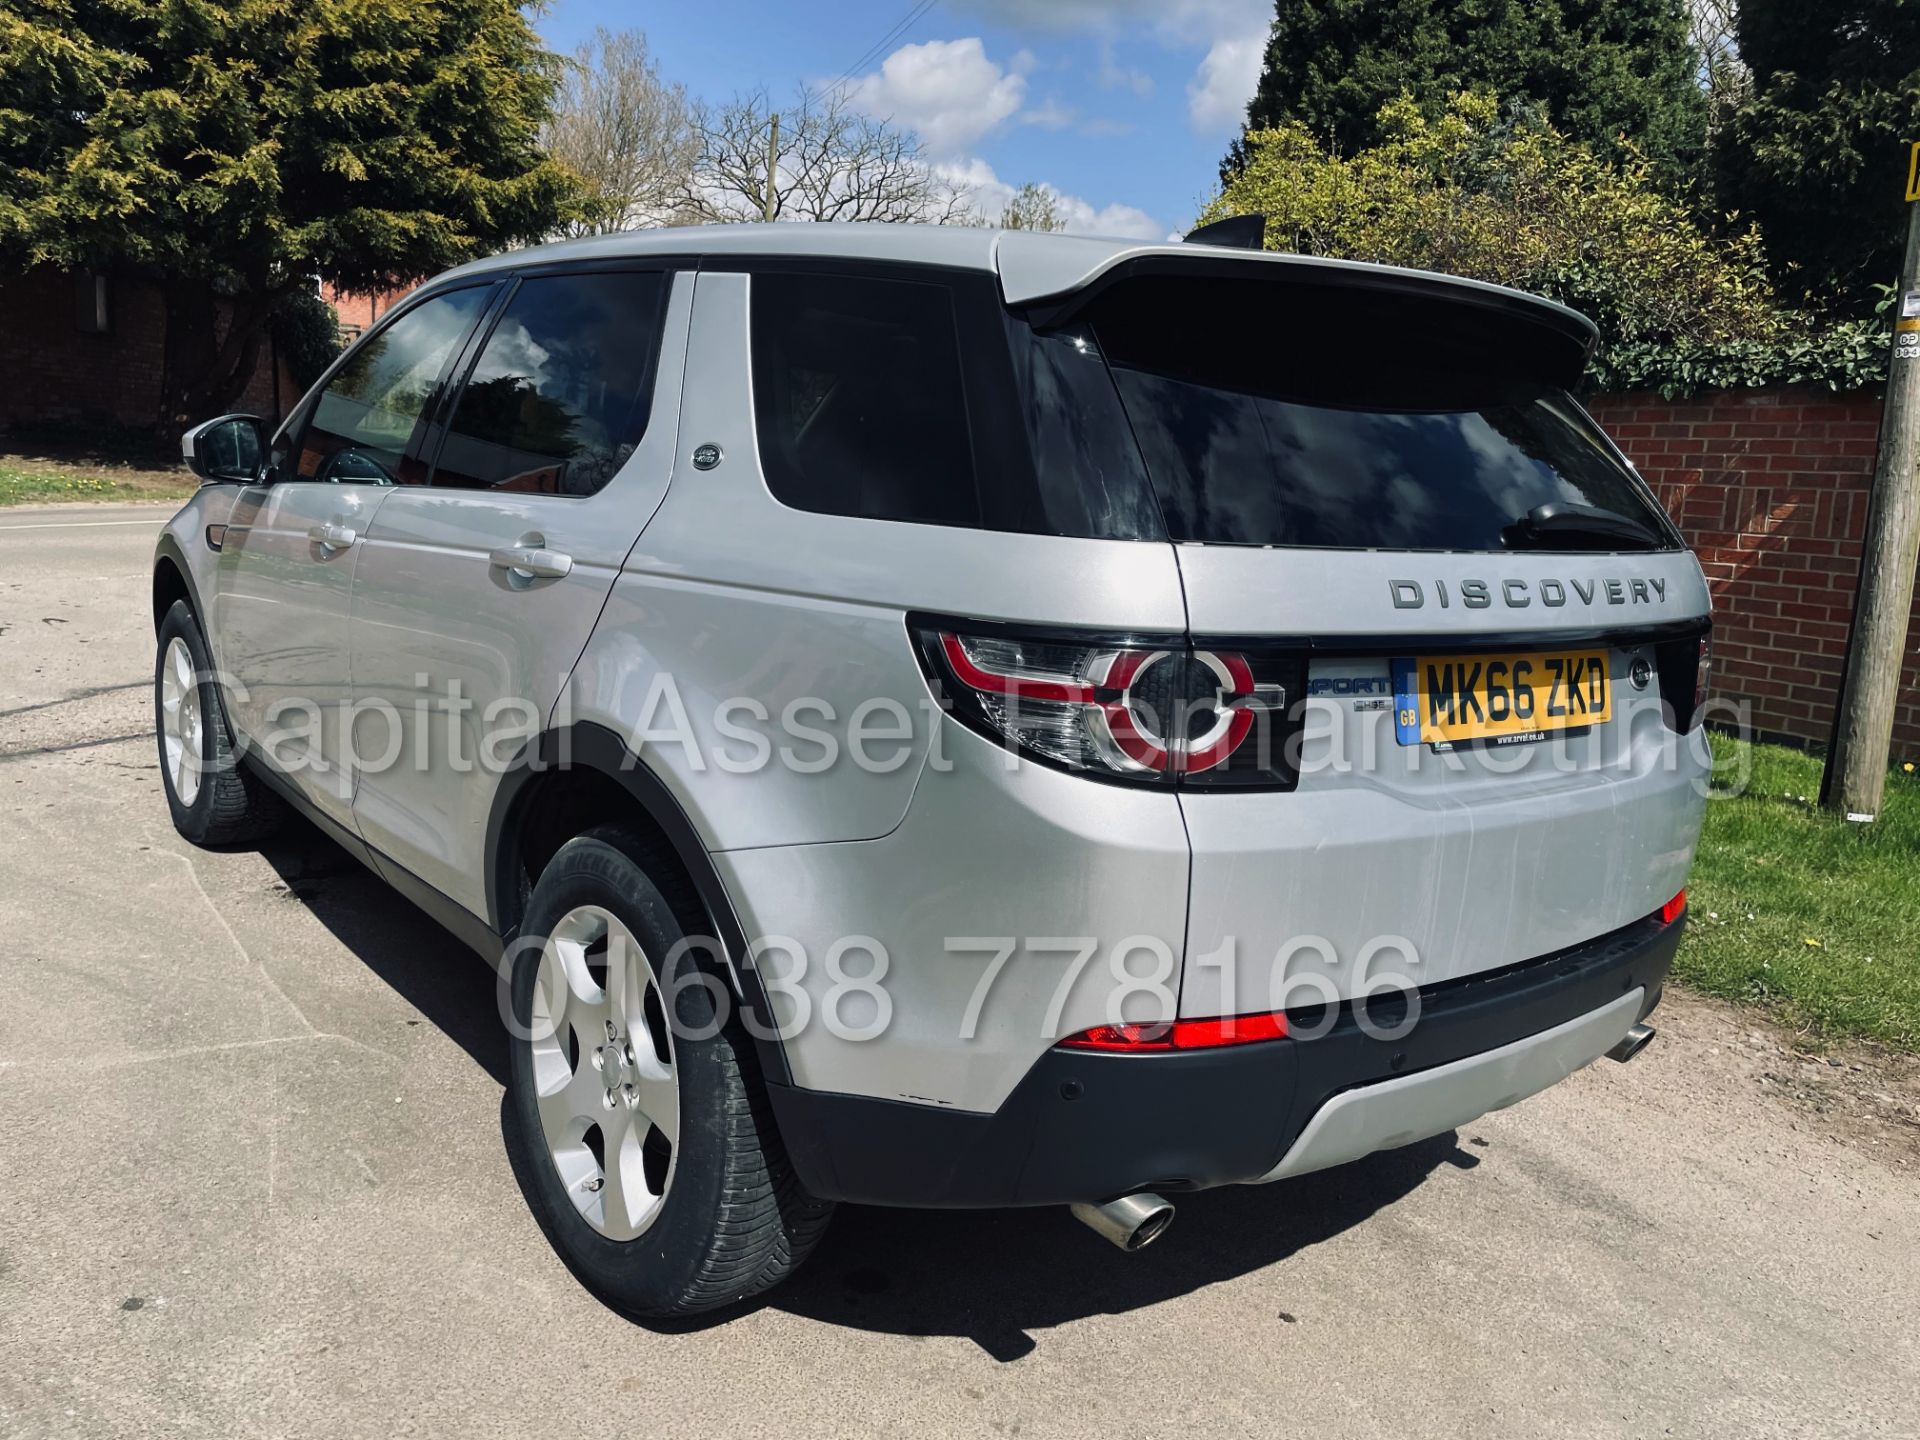 (On Sale) LAND ROVER DISCOVERY SPORT *HSE* SUV (66 REG - 2.0 TD4) *LEATHER - PAN ROOF - SAT NAV* - Image 10 of 55